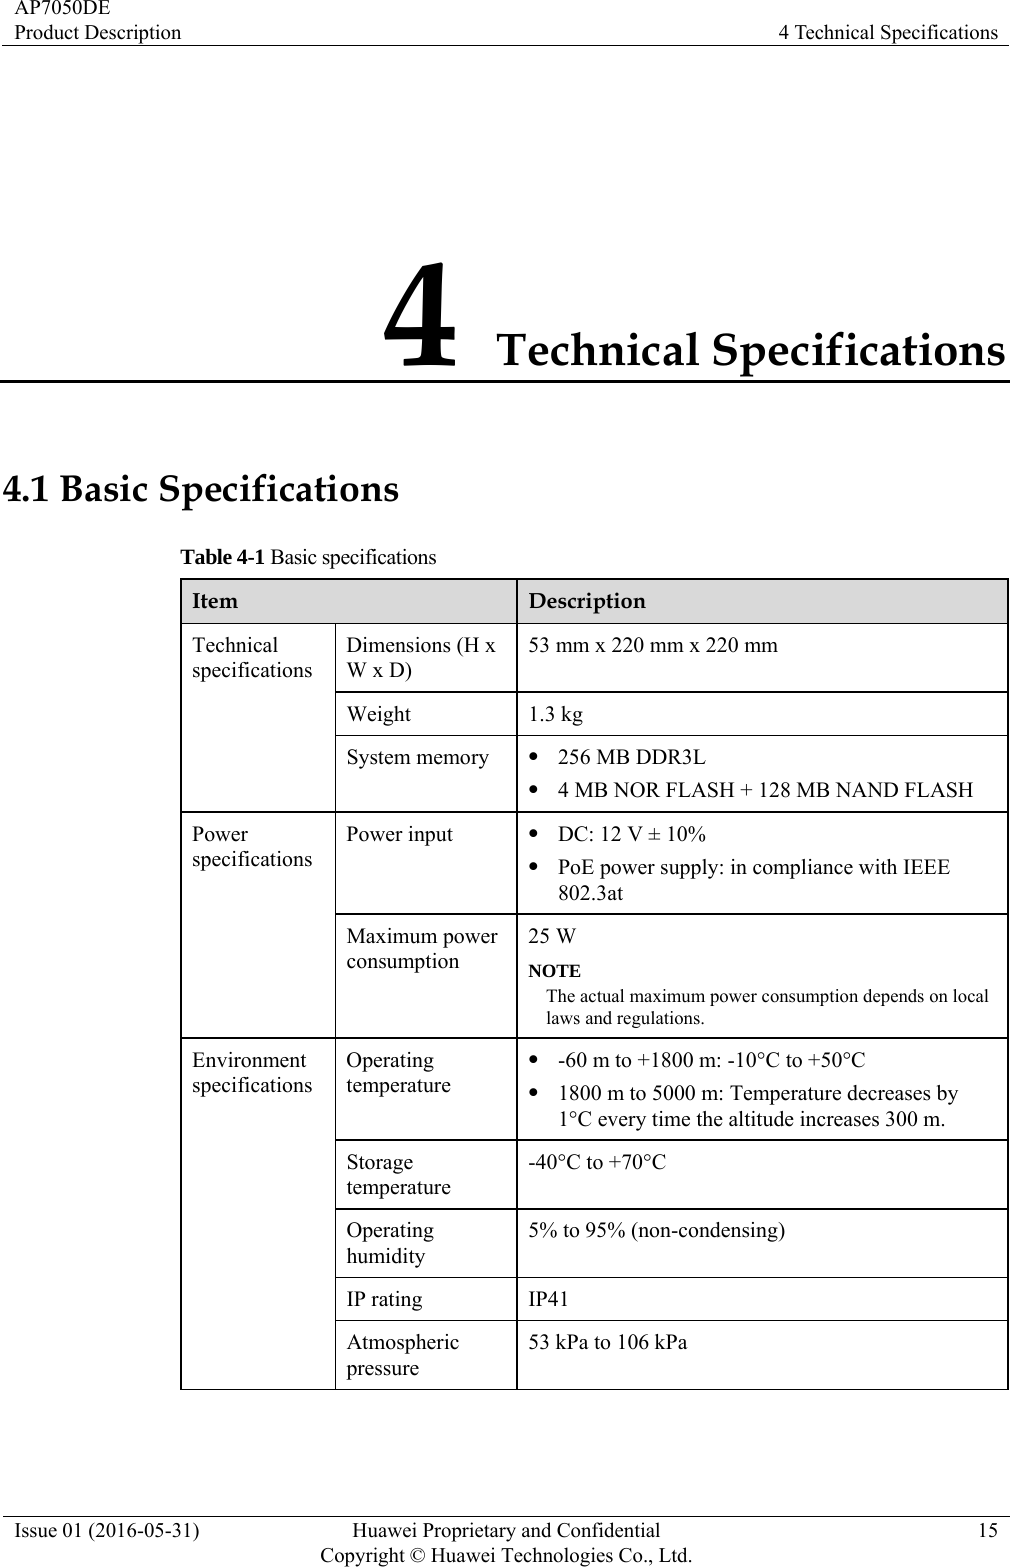 AP7050DE Product Description  4 Technical Specifications Issue 01 (2016-05-31)  Huawei Proprietary and Confidential         Copyright © Huawei Technologies Co., Ltd.15 4 Technical Specifications 4.1 Basic Specifications Table 4-1 Basic specifications Item  Description Technical specifications Dimensions (H x W x D) 53 mm x 220 mm x 220 mm Weight 1.3 kg System memory   256 MB DDR3L  4 MB NOR FLASH + 128 MB NAND FLASH Power specifications Power input   DC: 12 V ± 10%  PoE power supply: in compliance with IEEE 802.3at Maximum power consumption 25 W NOTE The actual maximum power consumption depends on local laws and regulations. Environment specifications Operating temperature  -60 m to +1800 m: -10°C to +50°C  1800 m to 5000 m: Temperature decreases by 1°C every time the altitude increases 300 m. Storage temperature -40°C to +70°C Operating humidity 5% to 95% (non-condensing) IP rating  IP41 Atmospheric pressure 53 kPa to 106 kPa  